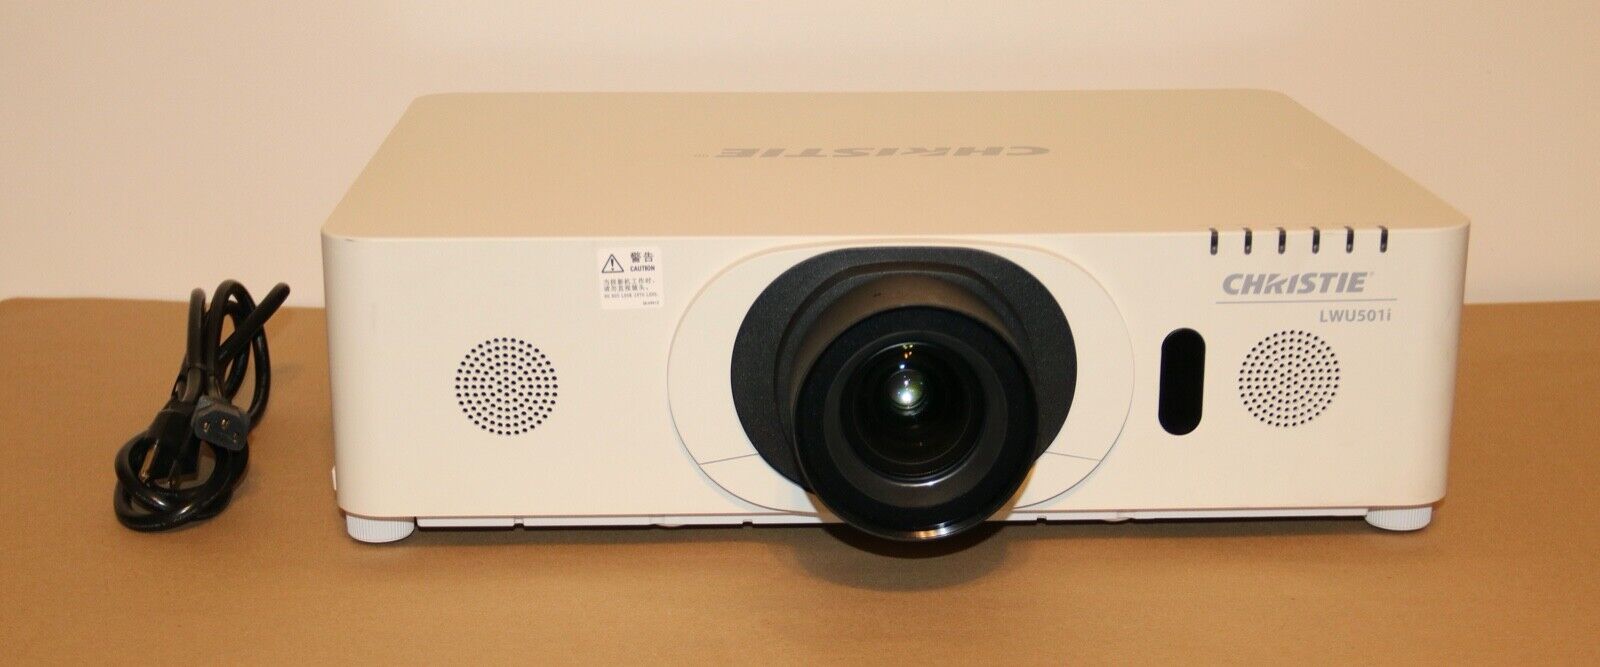 Christie LWU501i 3LCD WUXGA 5000 lumens.Large Venue Projector.2711 Hours on Lamp